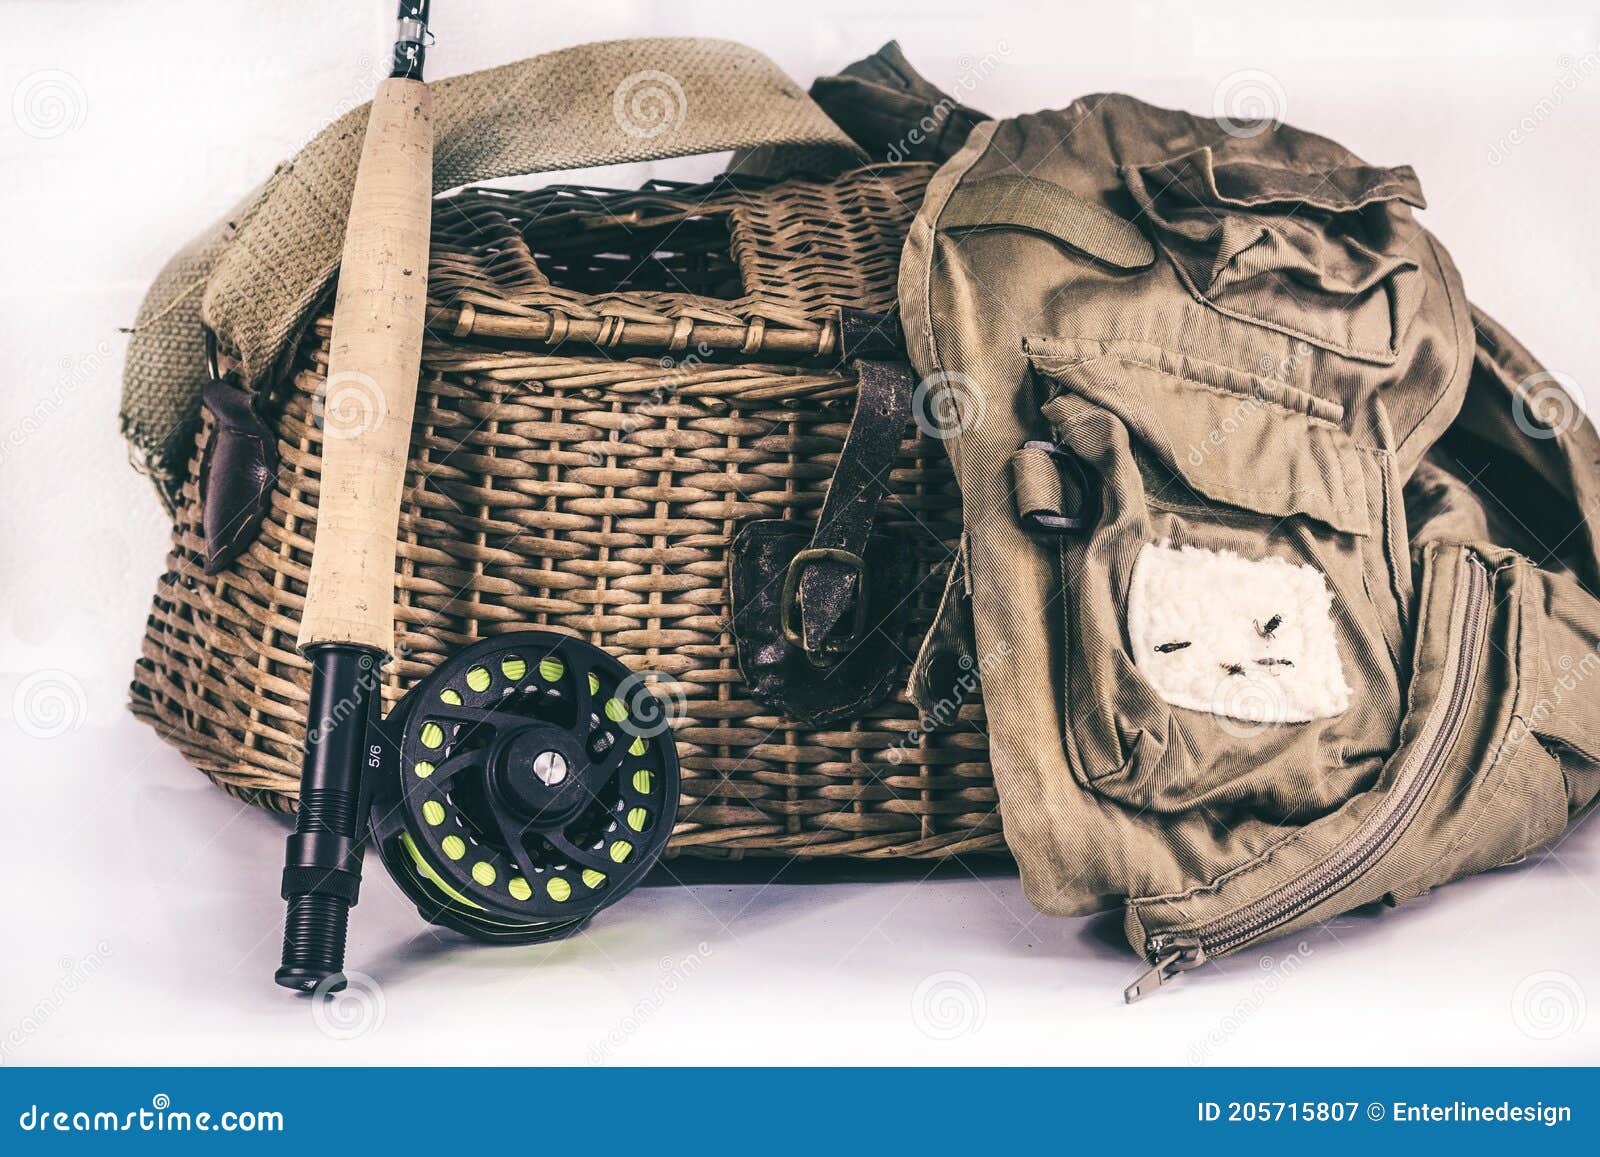 Fly Fishing Rod, Vest and Fish Creel on a White Background Stock